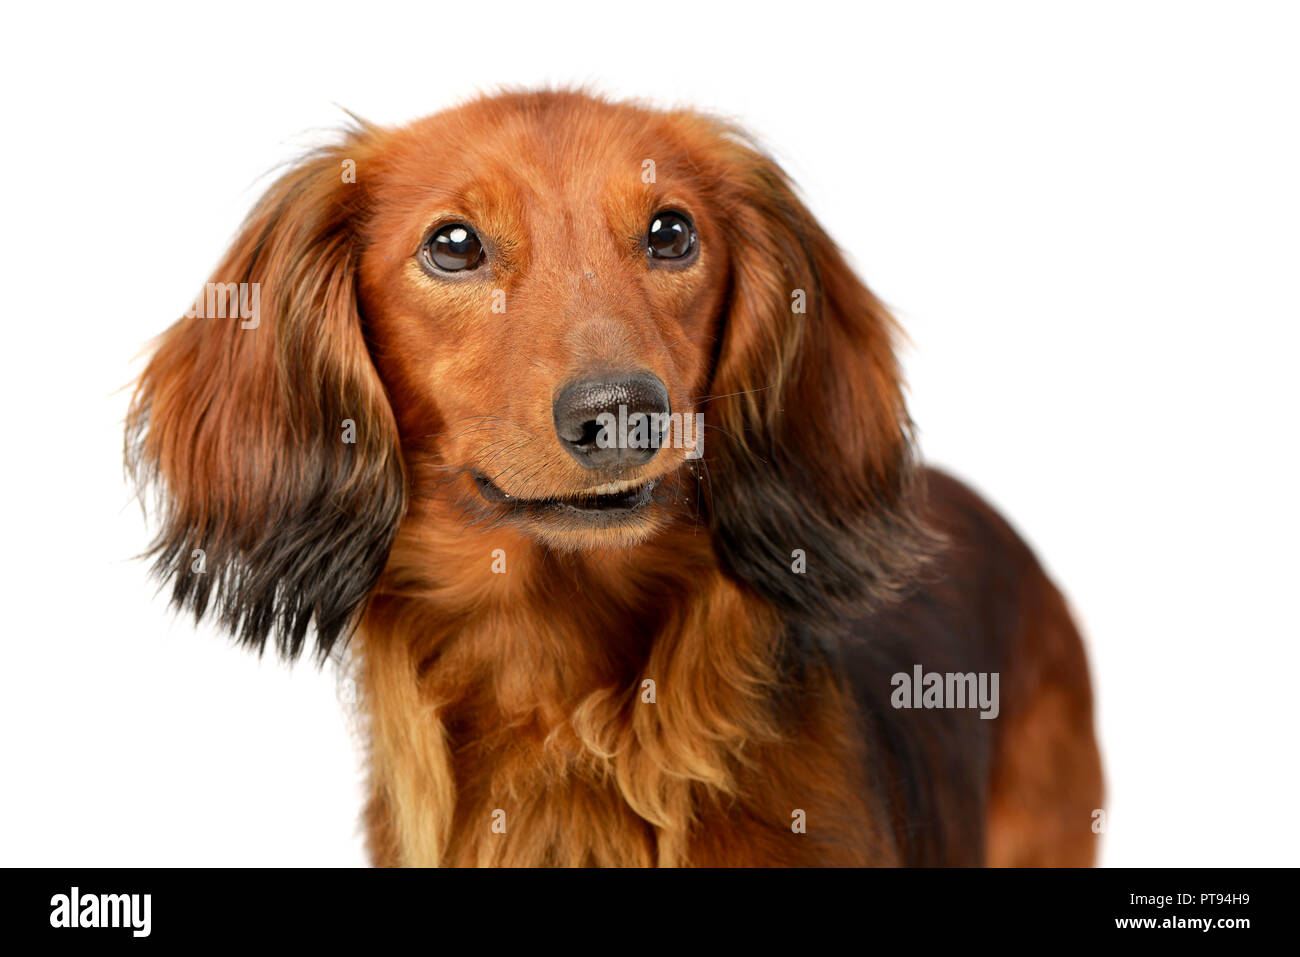 Portrait of an adorable longhaired Dachshund, studio shot, isolated on white. Stock Photo